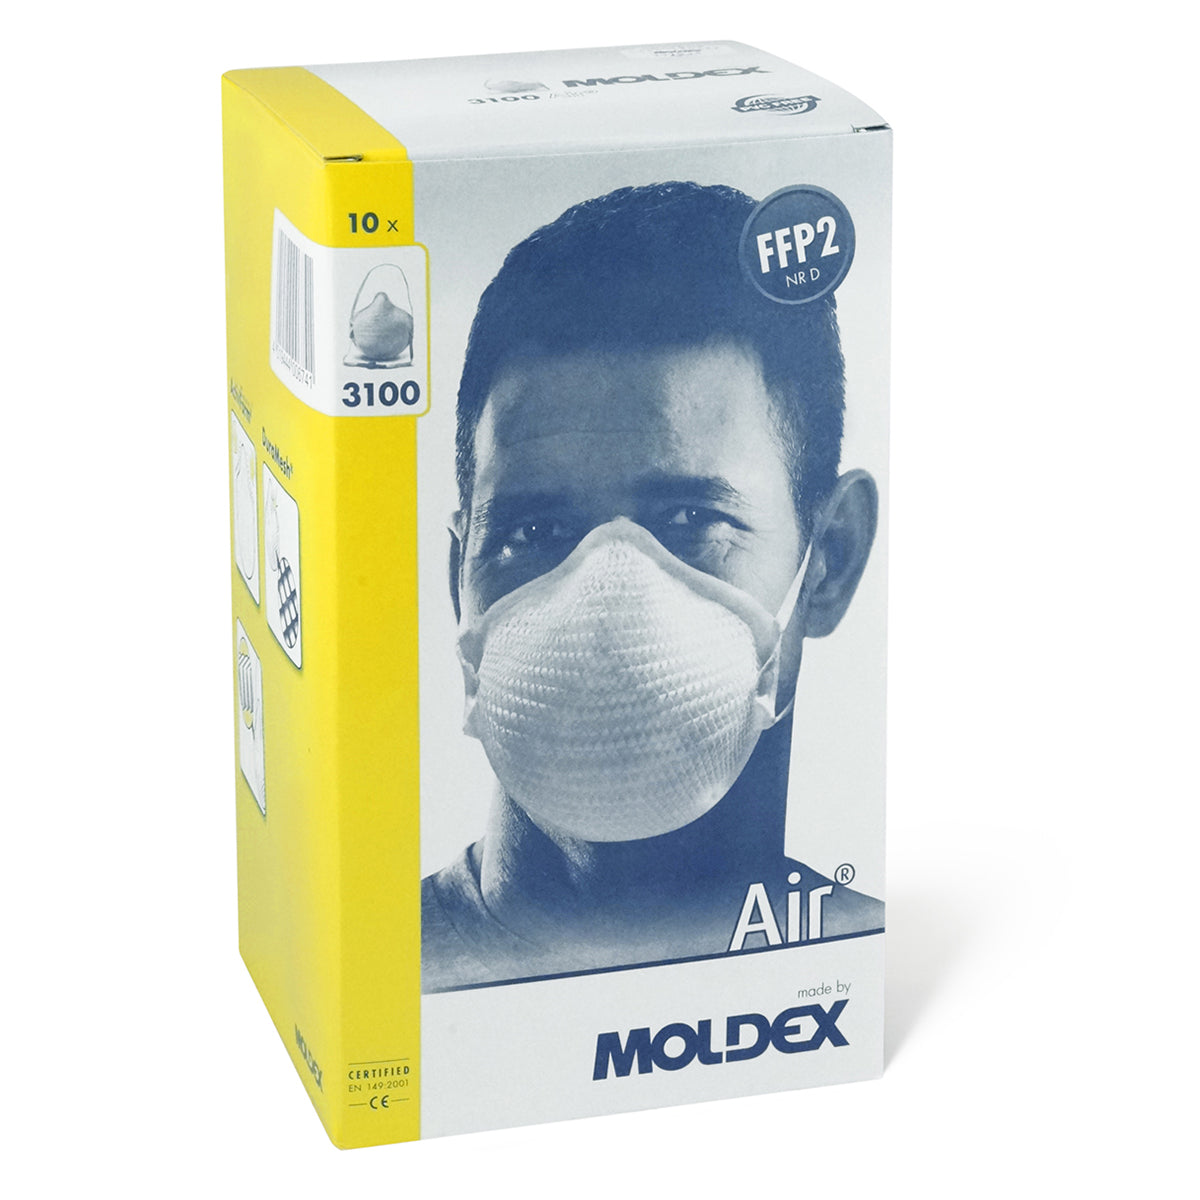 Moldex 3100 Air FFP2 NR D Type IIR Mask Size M/L Pack of 10